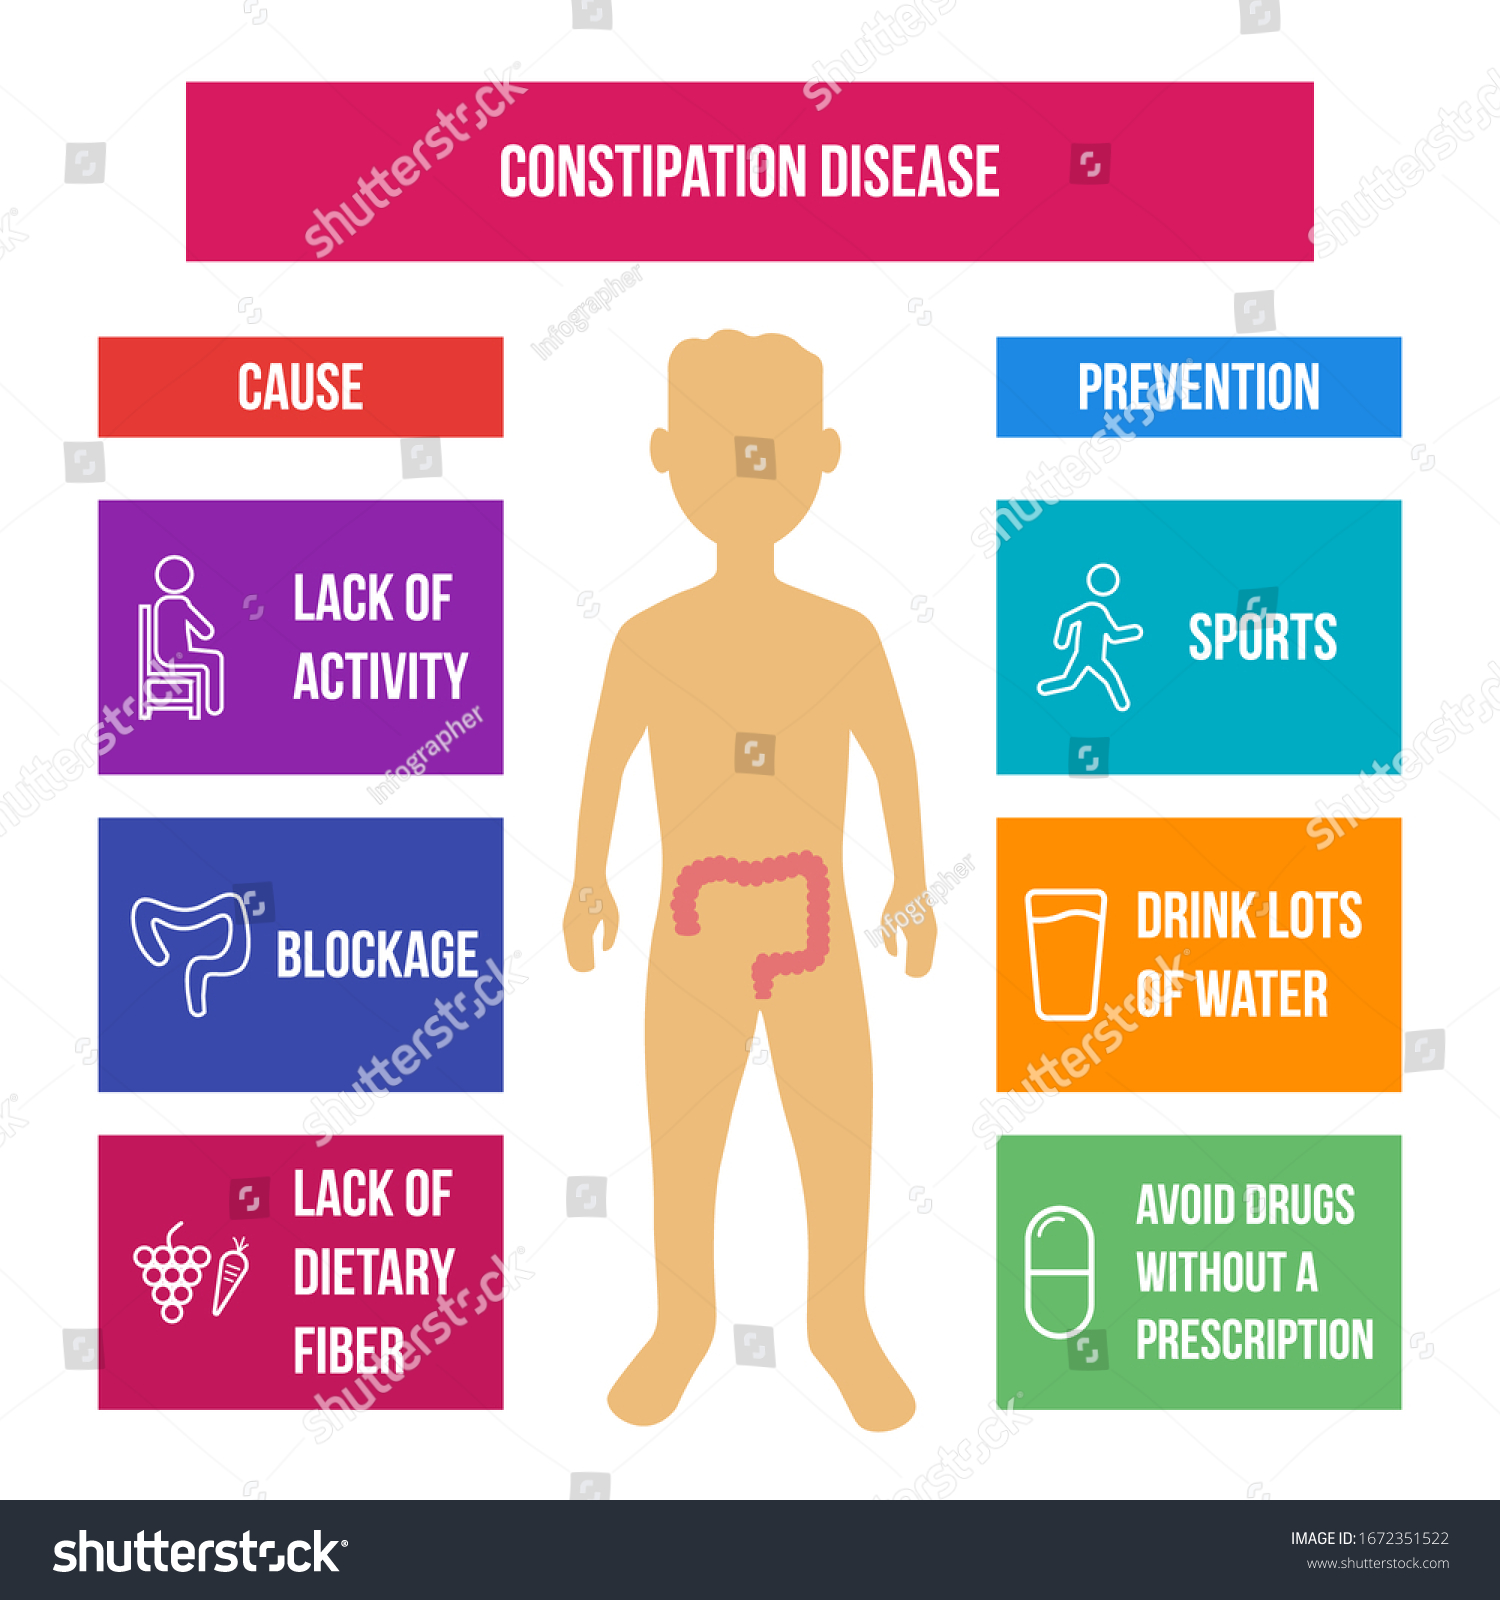 Constipation Disease Infographic Template Medical Healthcare Stock Vector Royalty Free 1672351522 1173